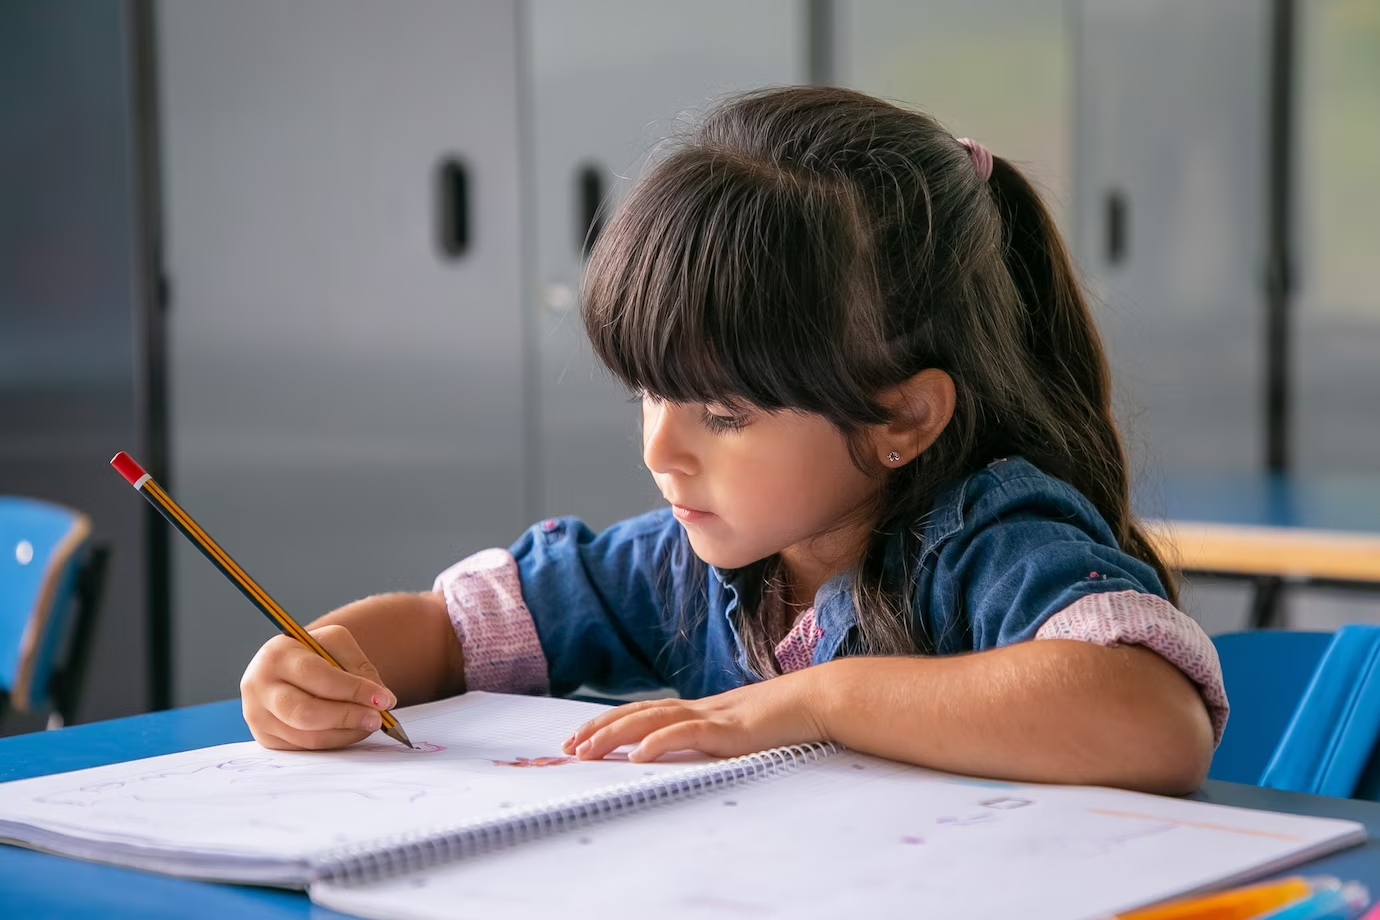 A little girl writing on a paper